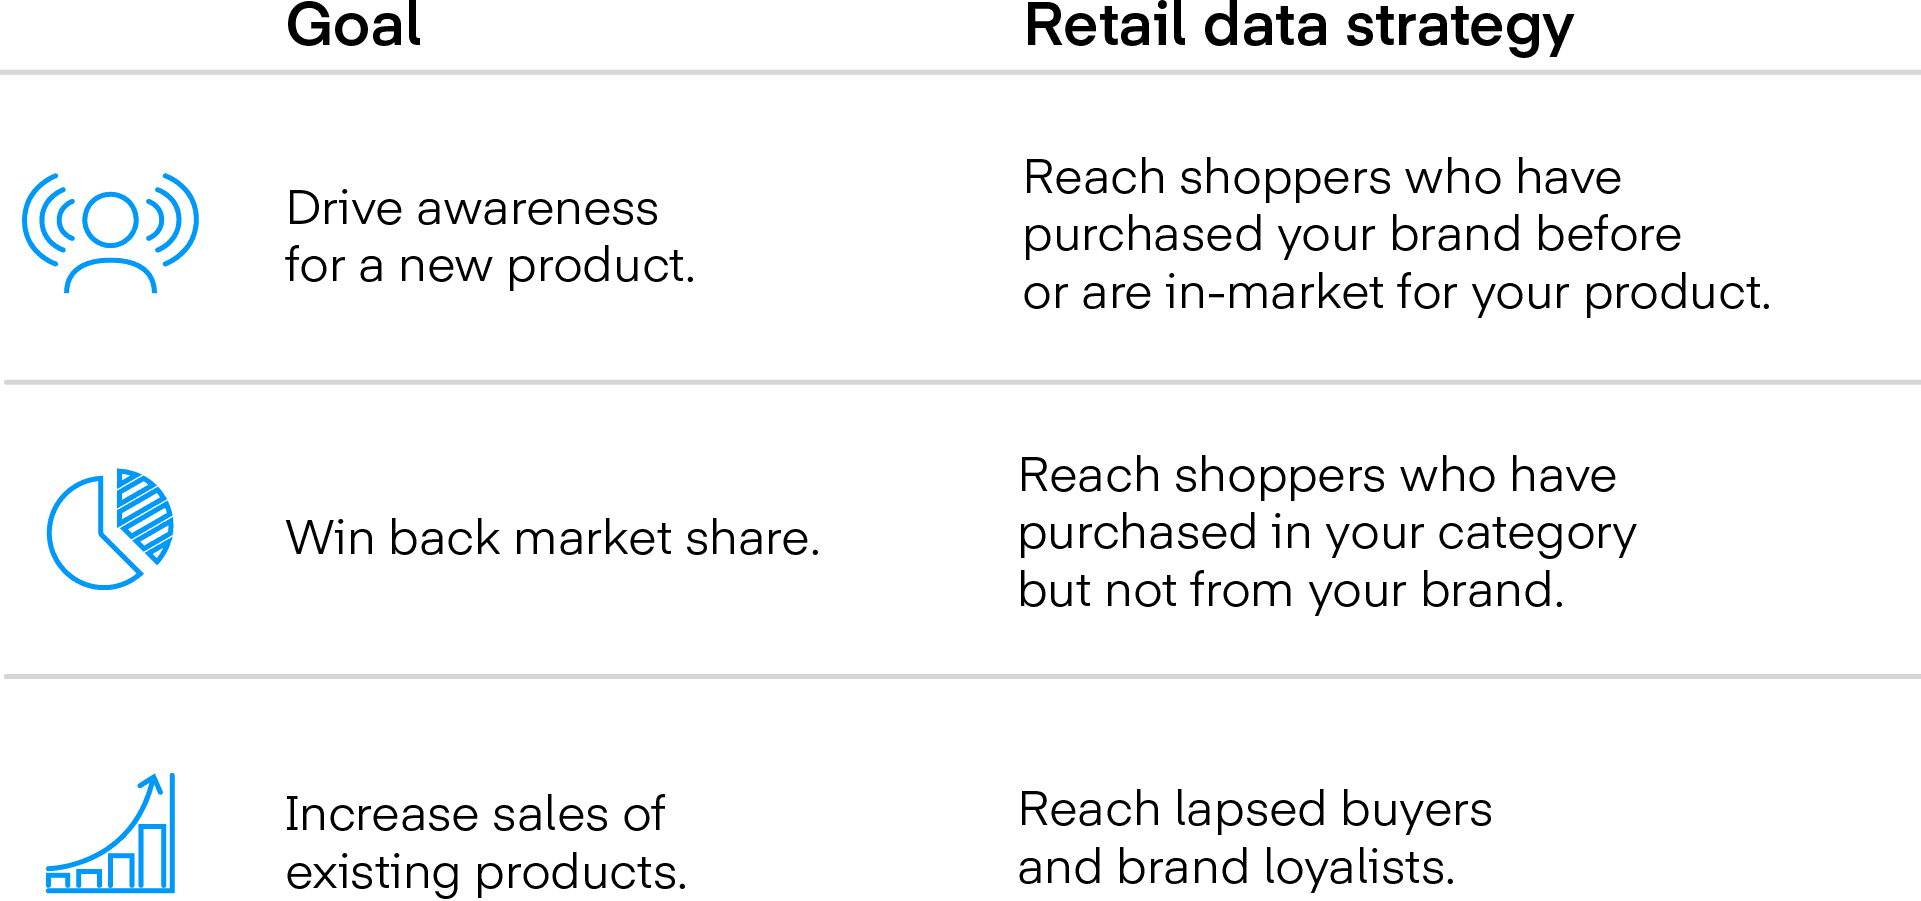 Chart shows examples of how to use retail data strategies